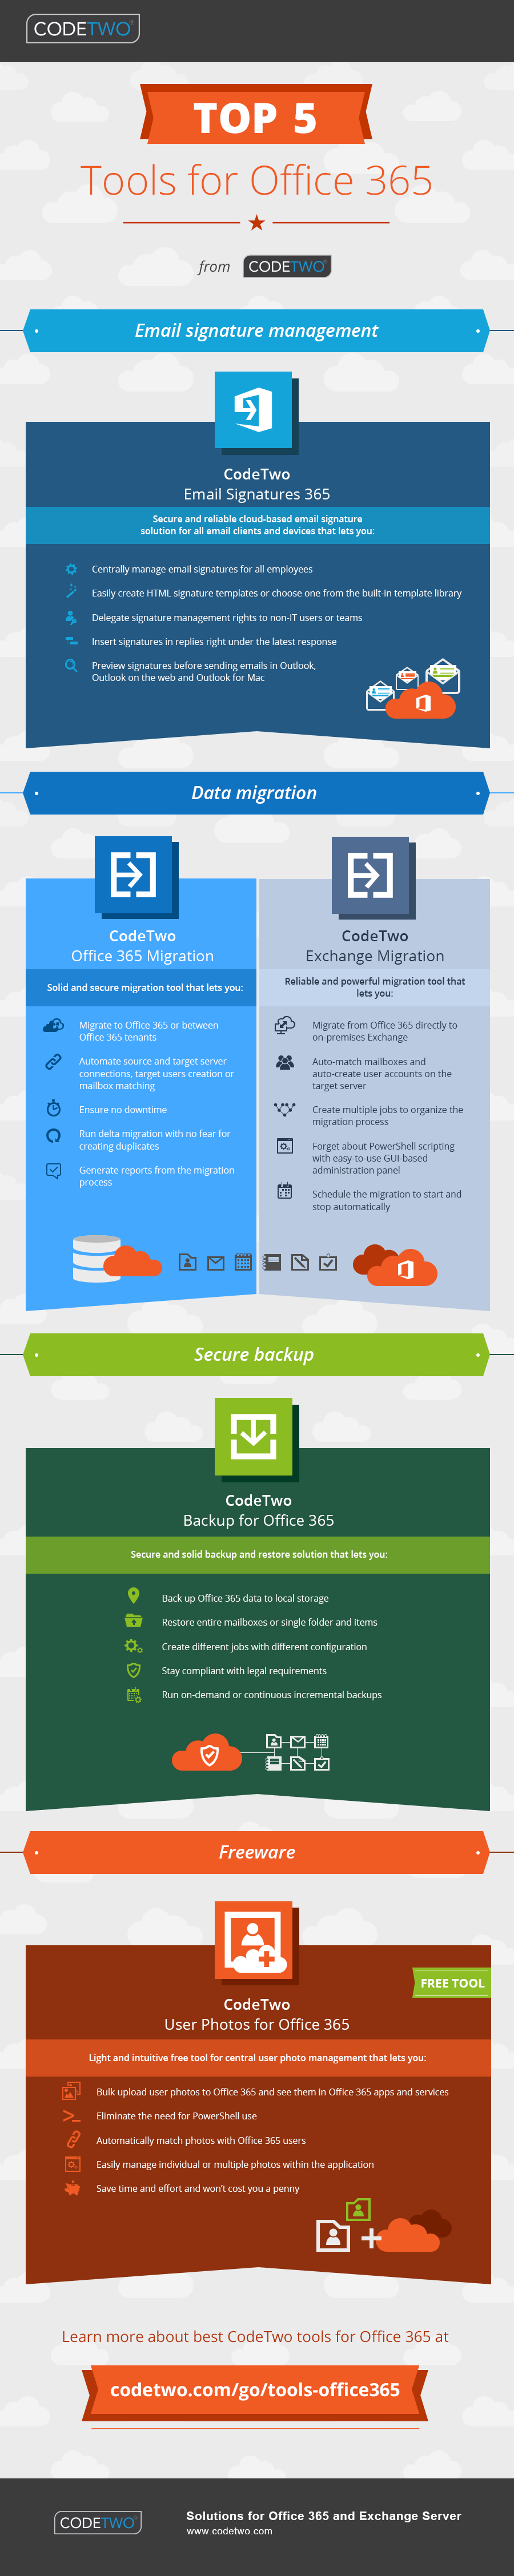 Top 5 tools for Office 365 from CodeTwo | Infographic